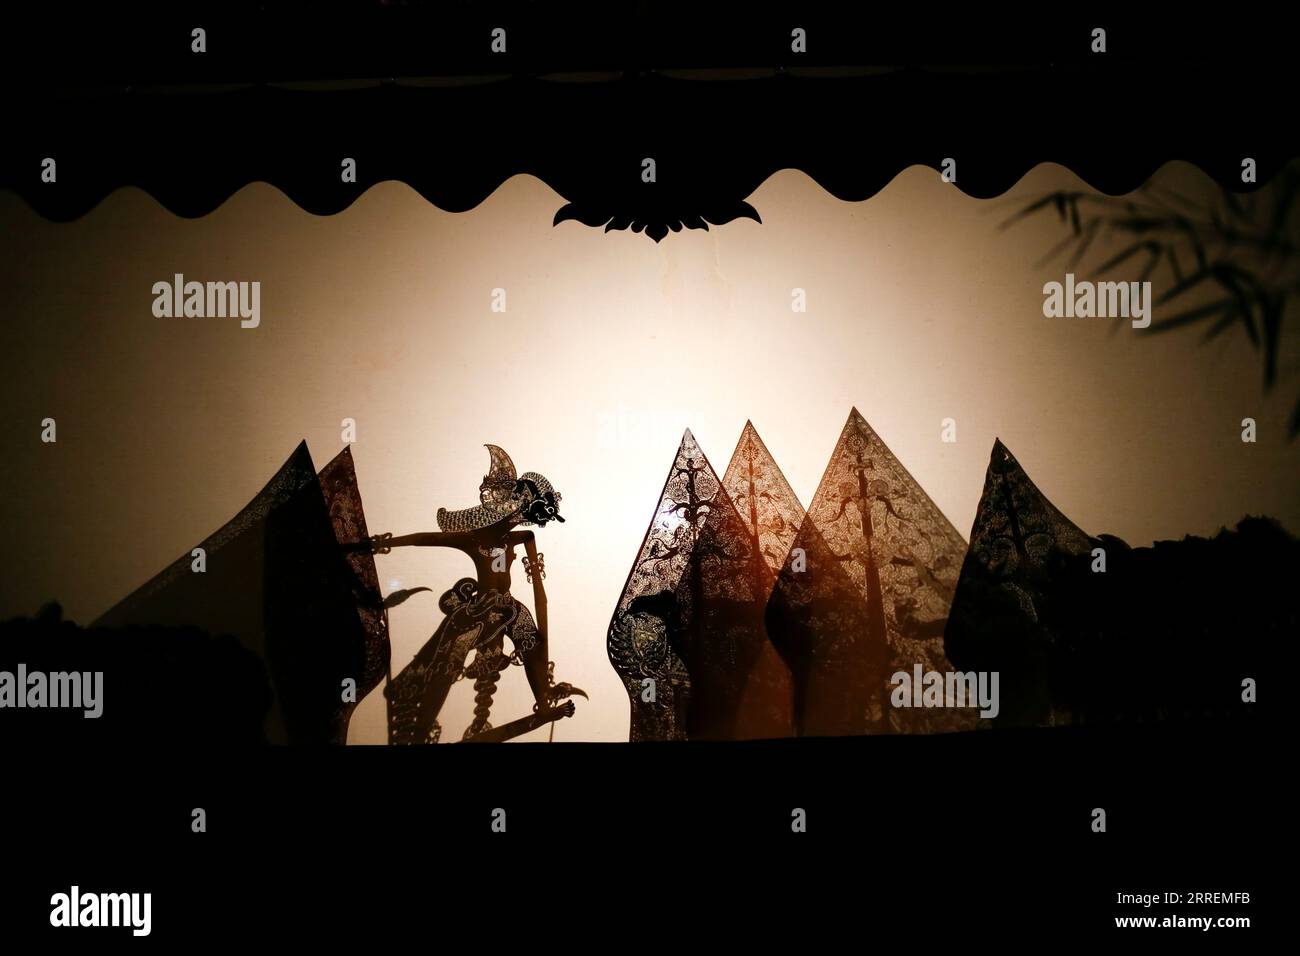 Wayang or shadow puppet performing in the screen Stock Photo